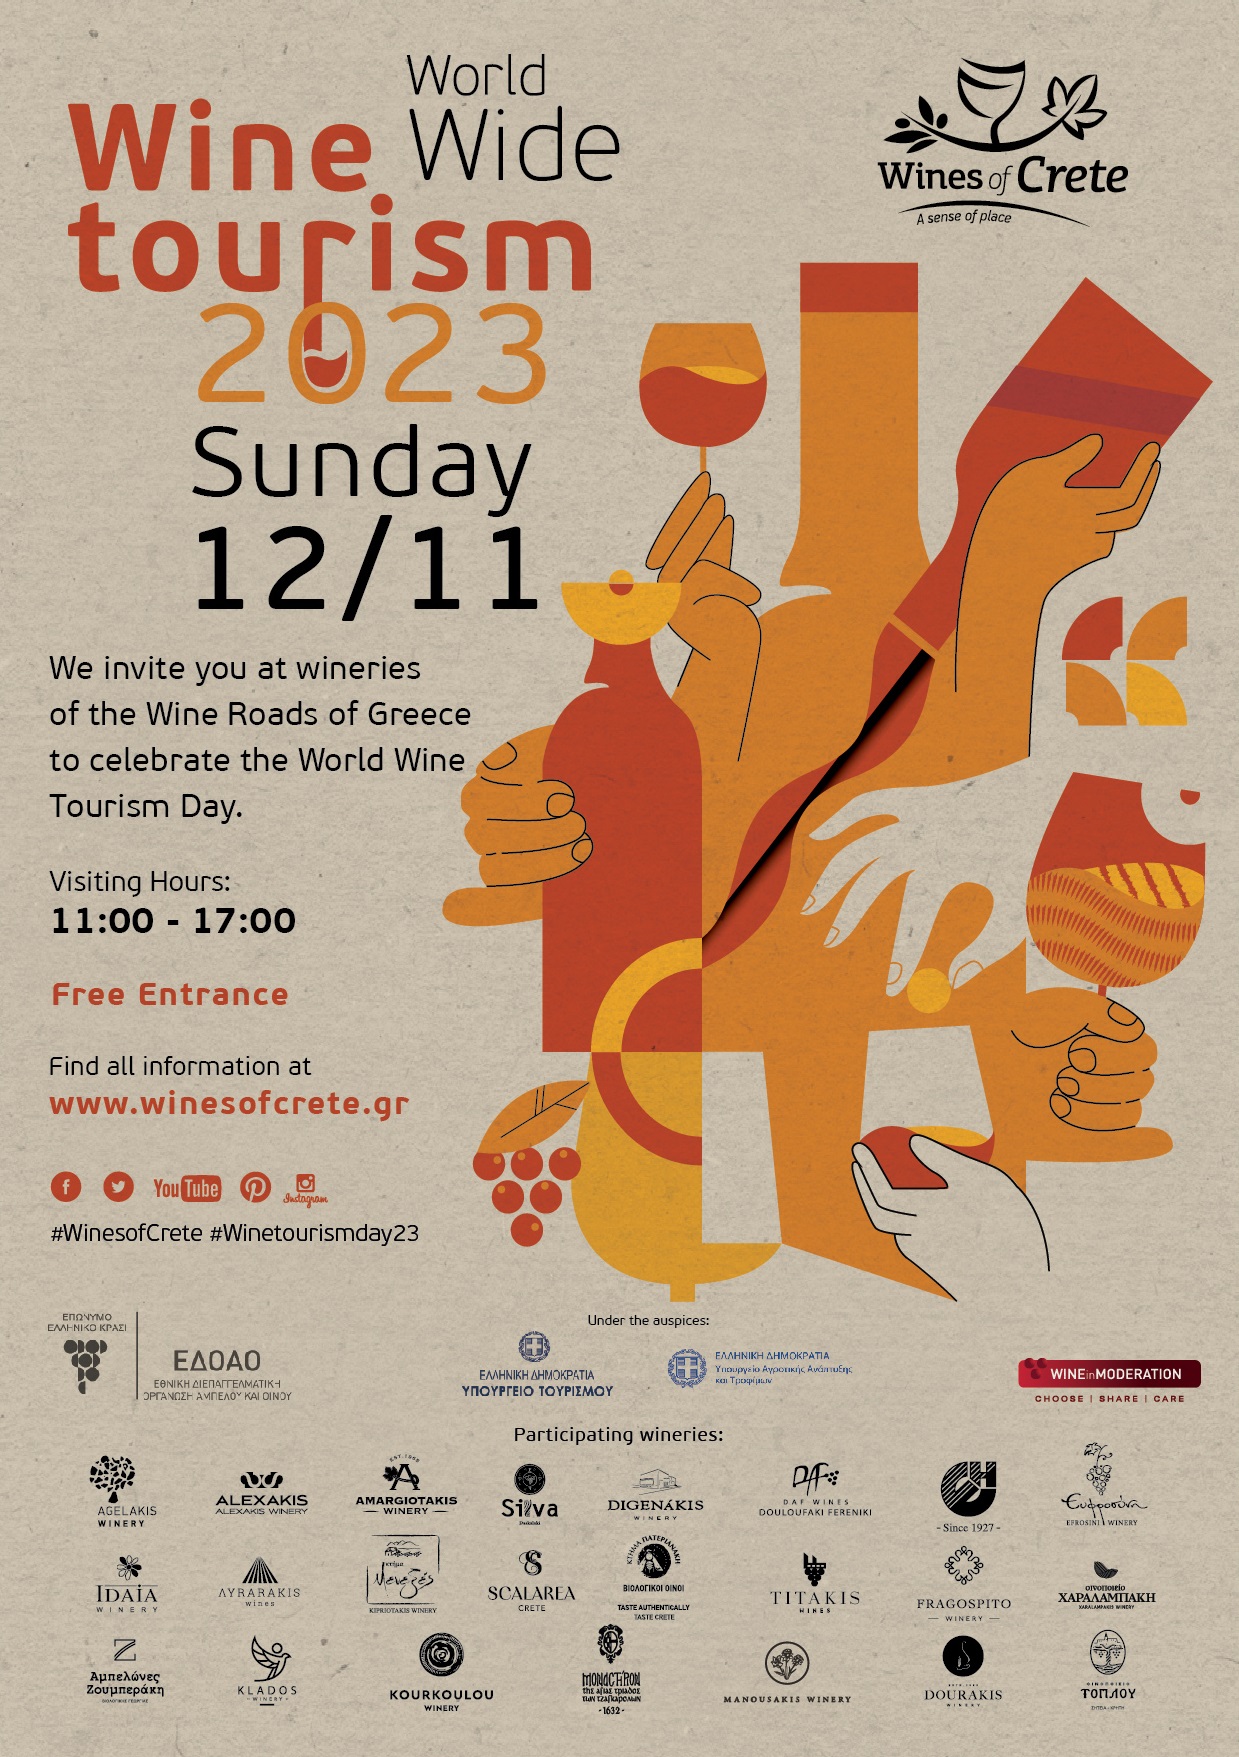 Celebrate Winetourism Day in Crete on Sunday the 12th of November 2023